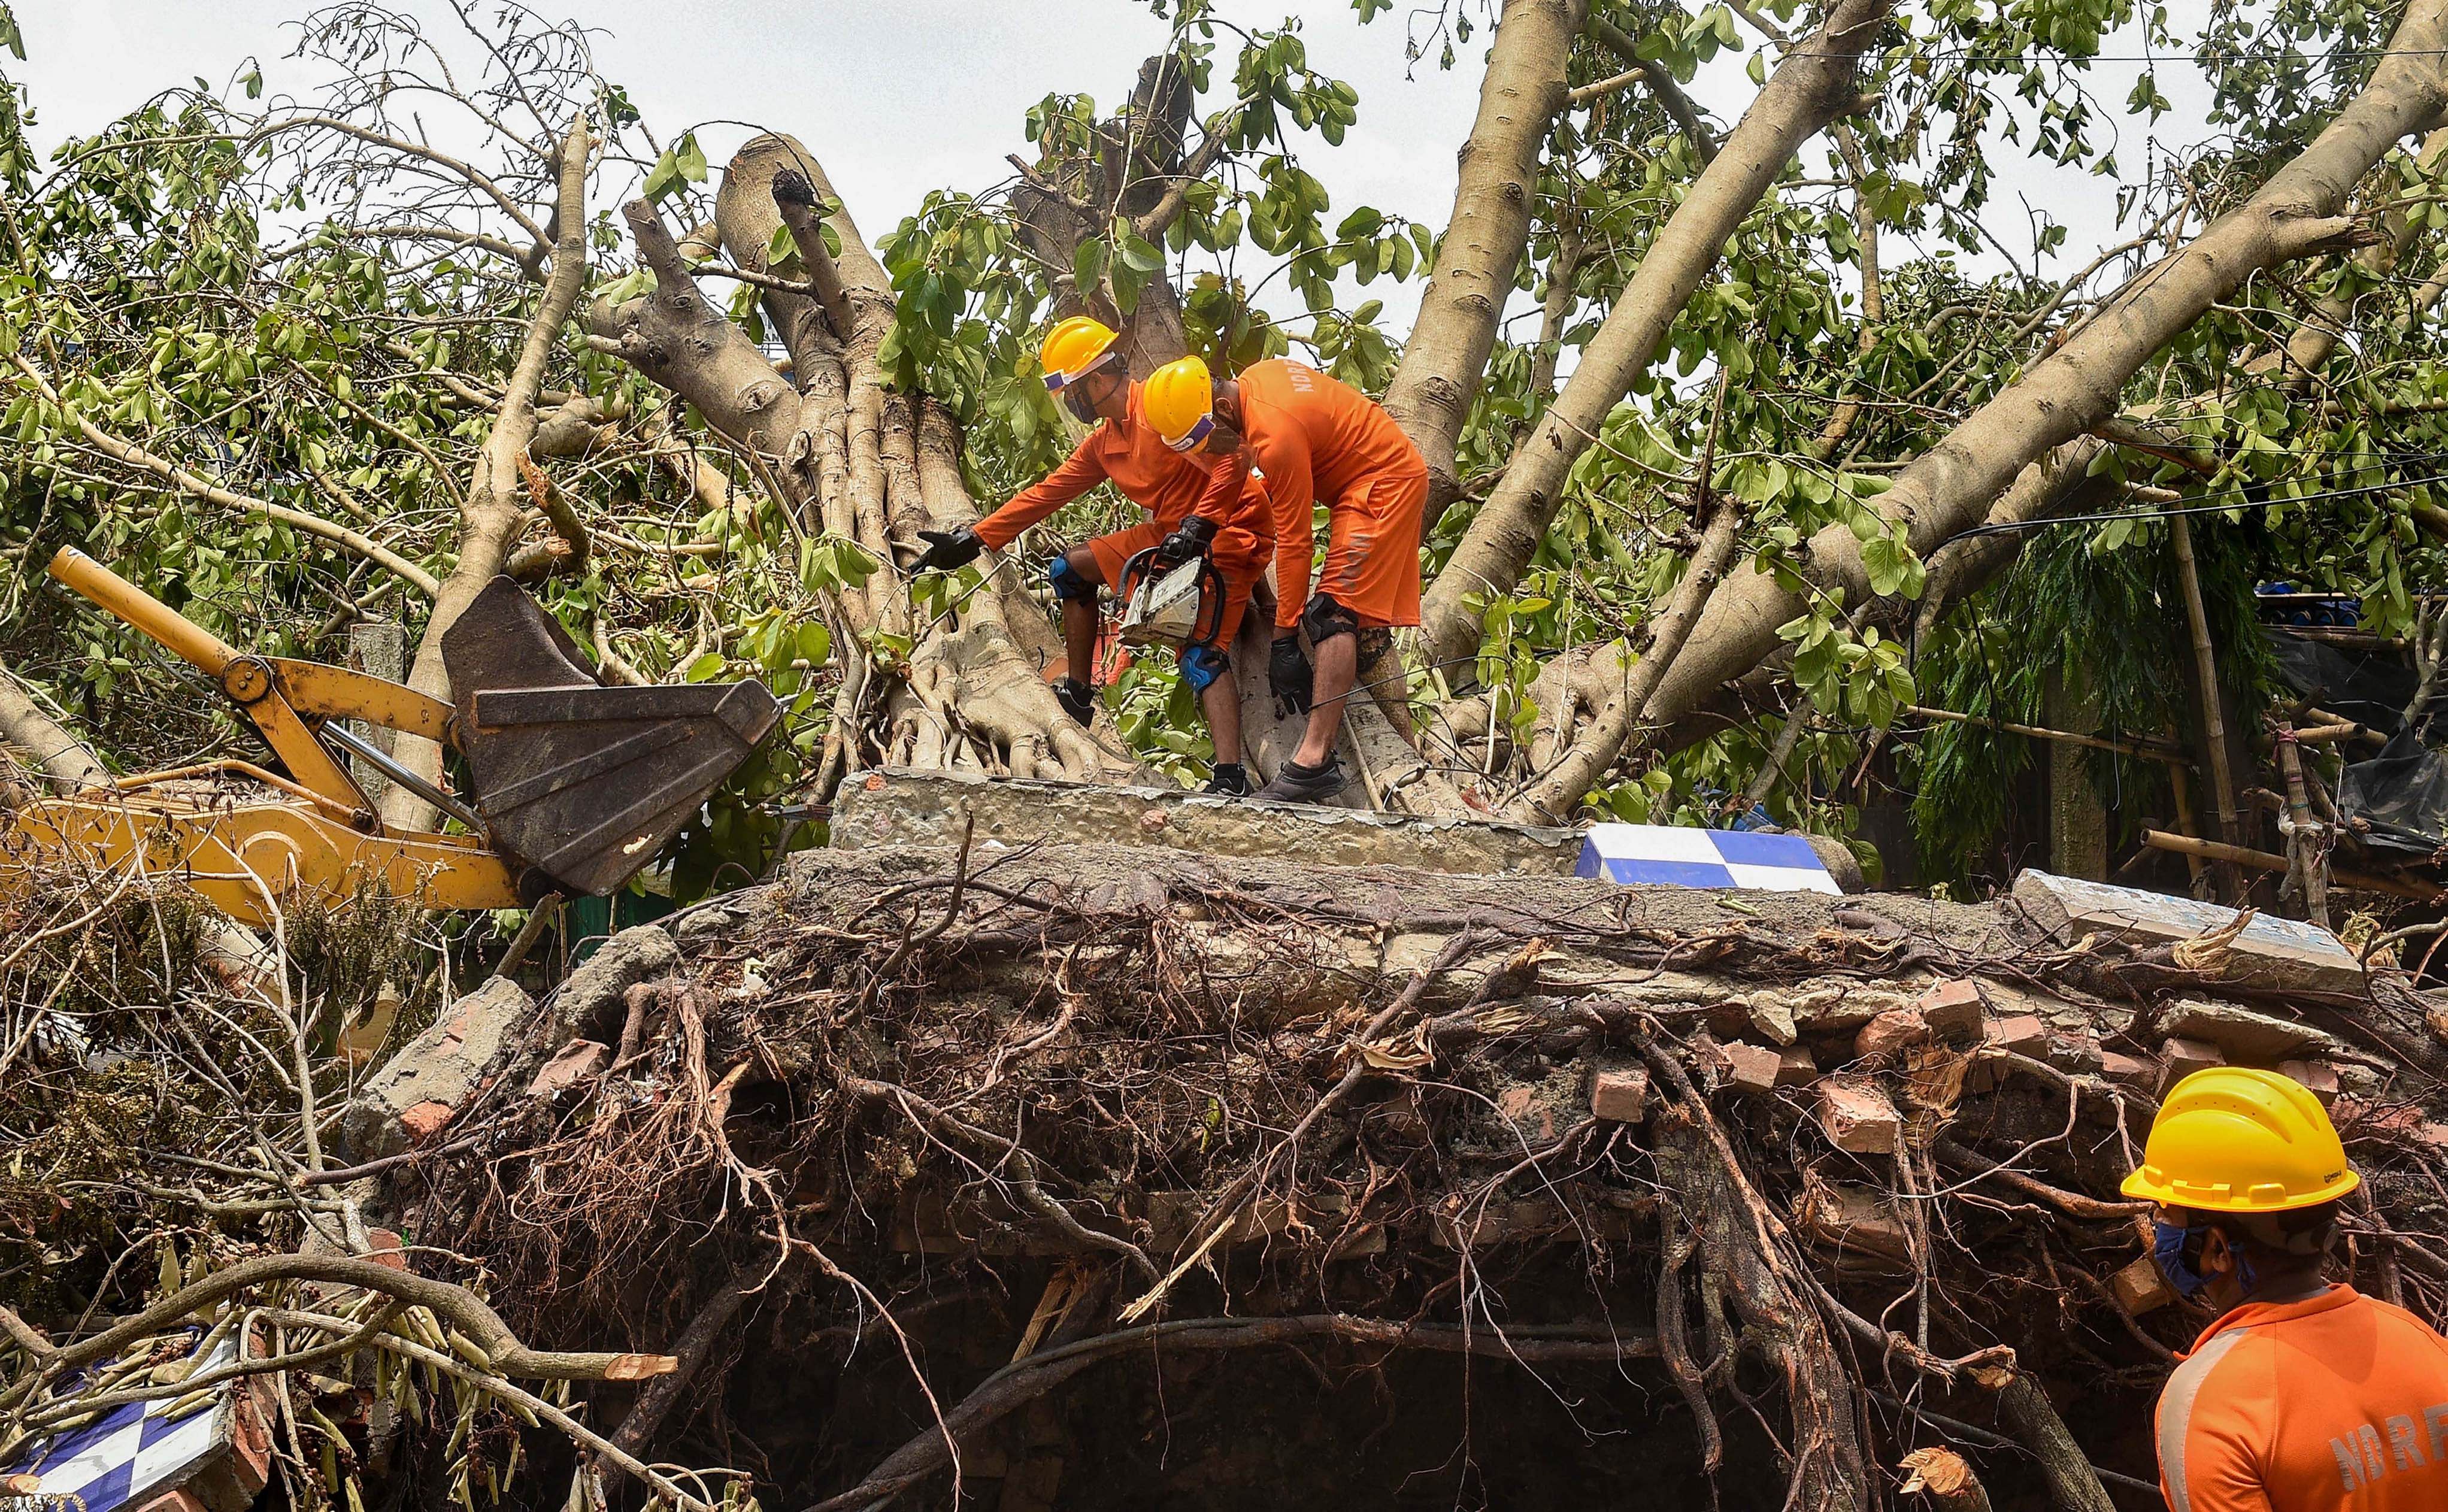 NDRF personnel work to clear an uprooted tree from a road, in the aftermath of Cyclone Amphan, in Kolkata. (PTI photo)